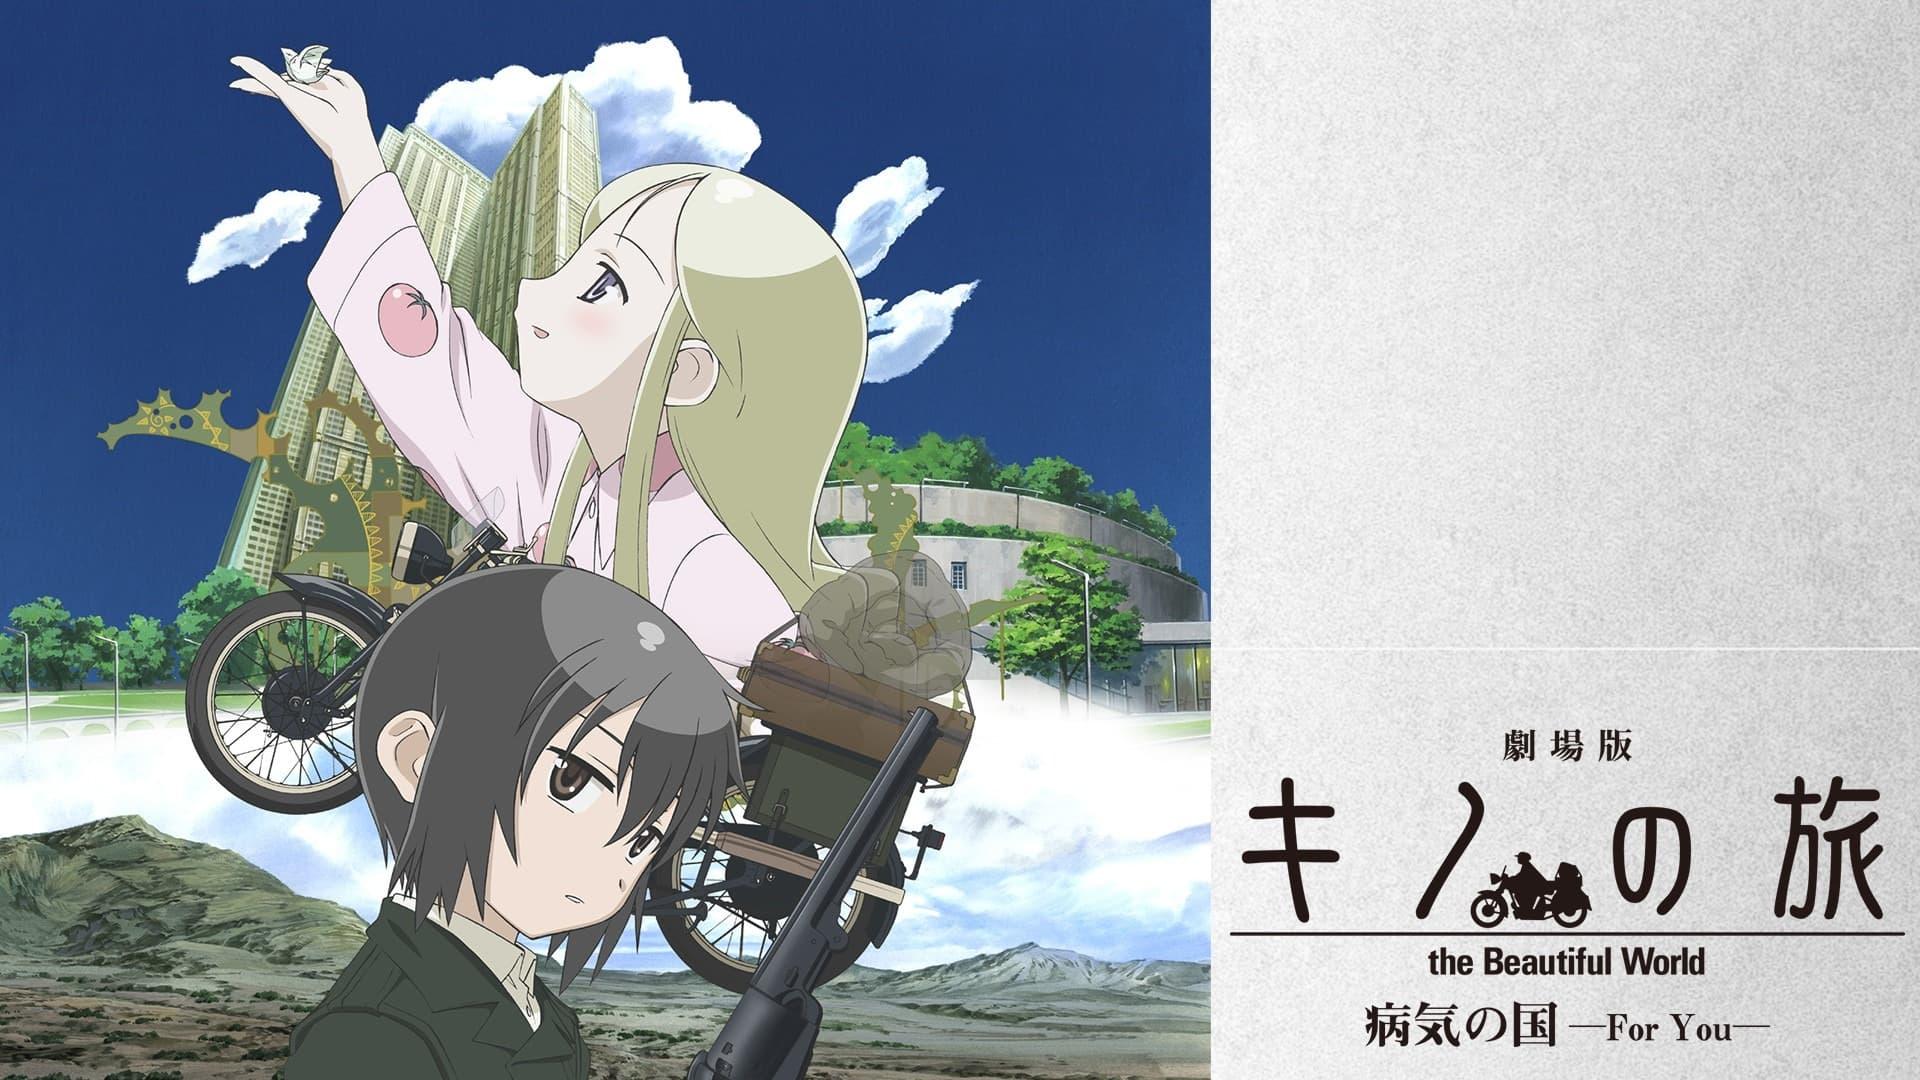 Kino's Journey: Country of Illness —For You— backdrop